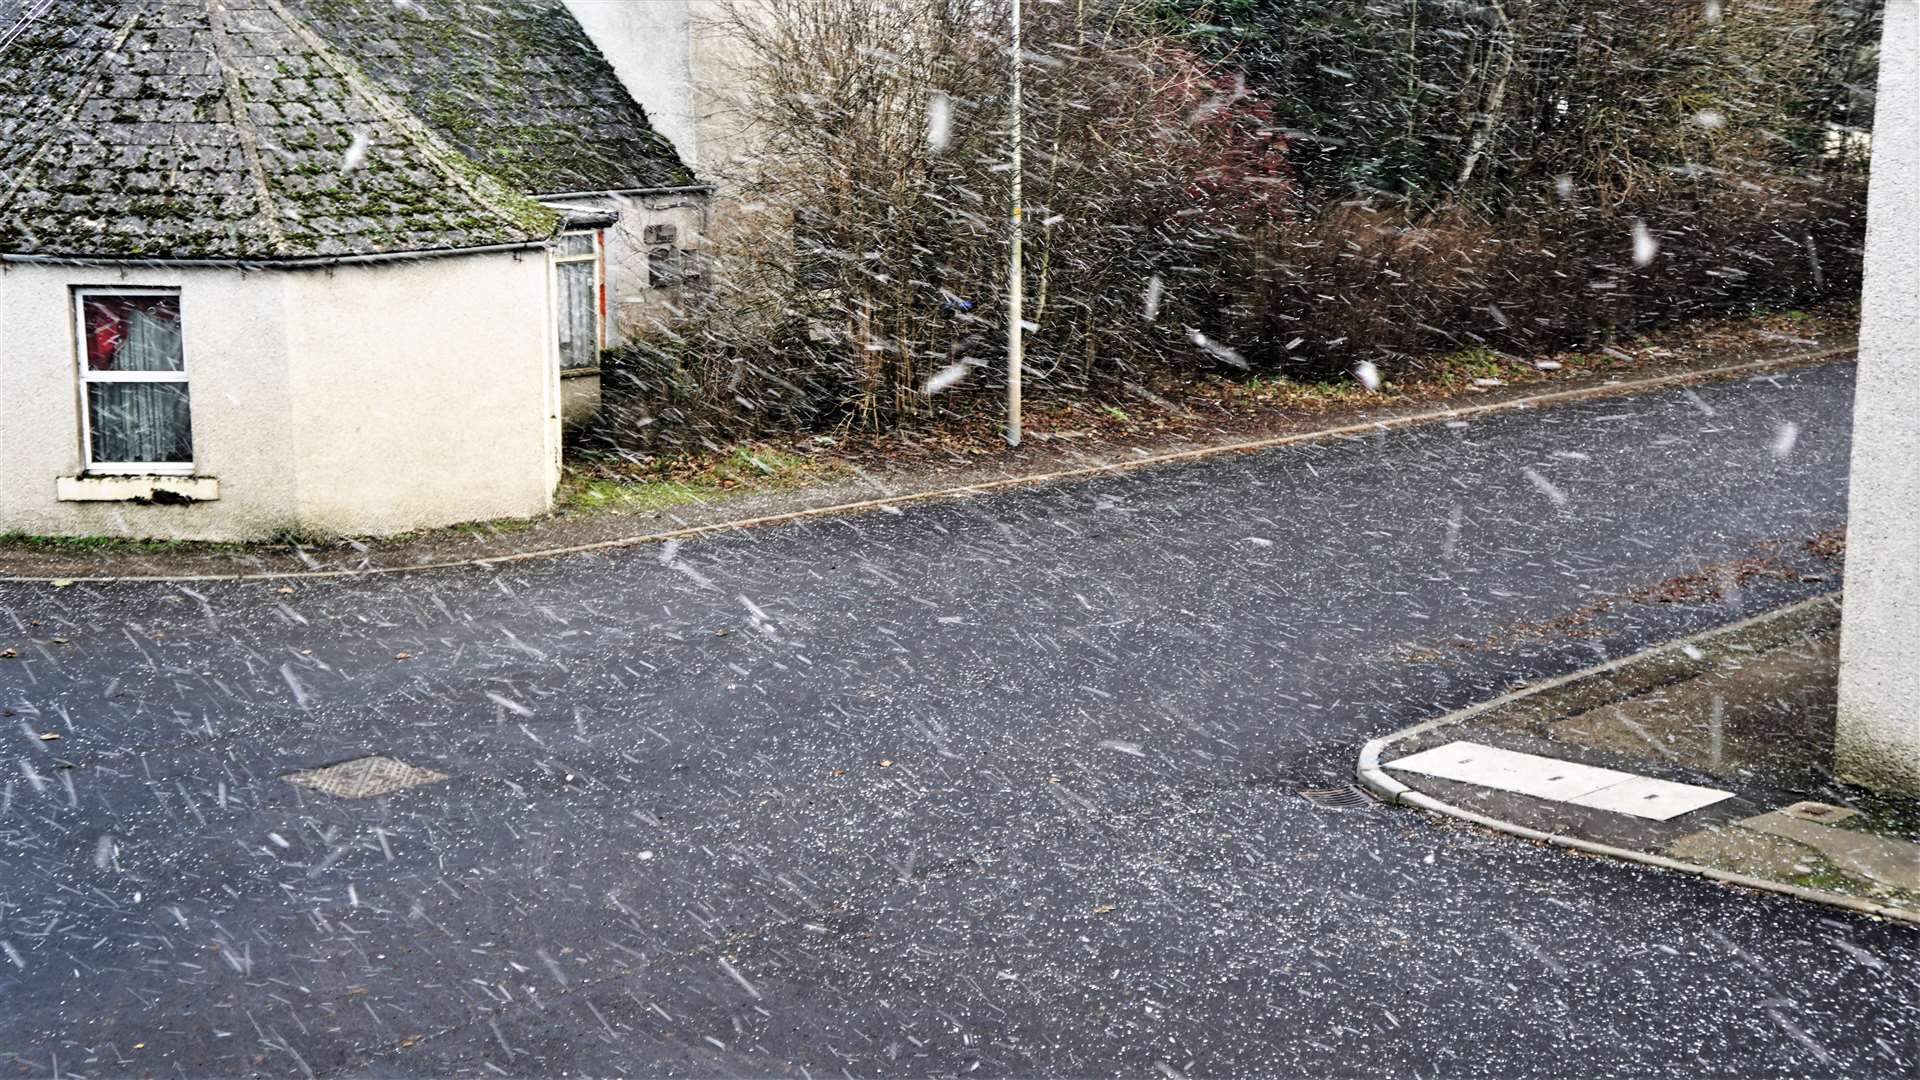 Snow falling in Watten today. Picture: DGS